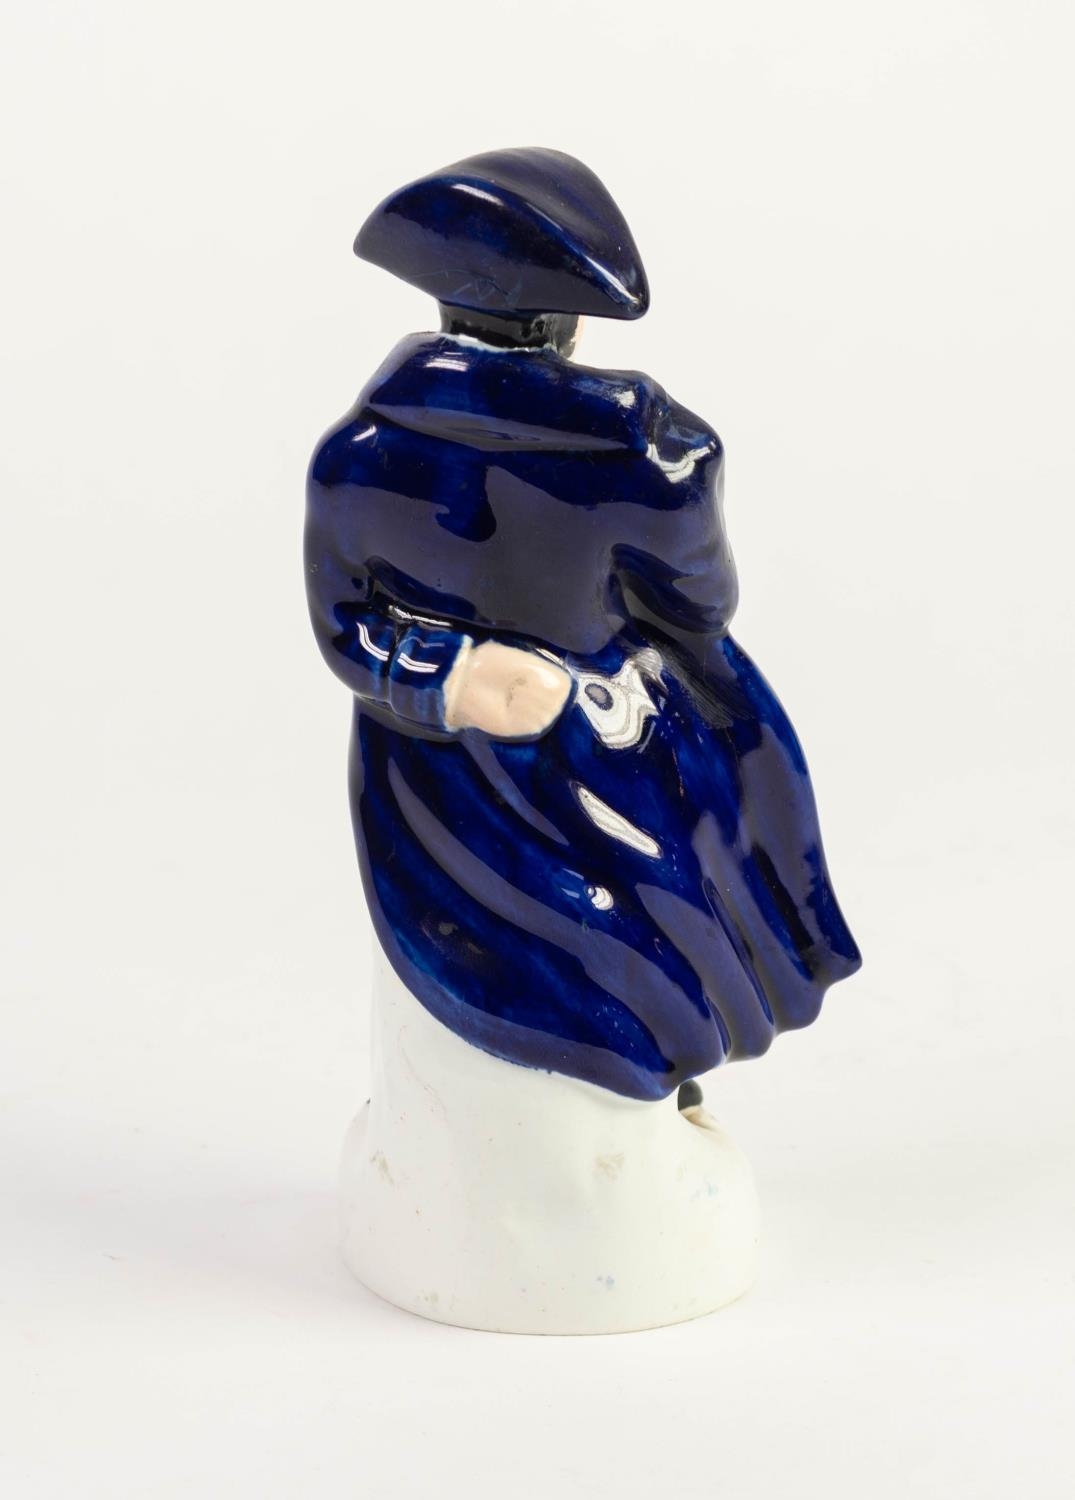 19th CENTURY STAFFORDSHIRE PORCELAIN FIGURE OF NAPOLEON, holding a field telescope, brightly - Image 2 of 2